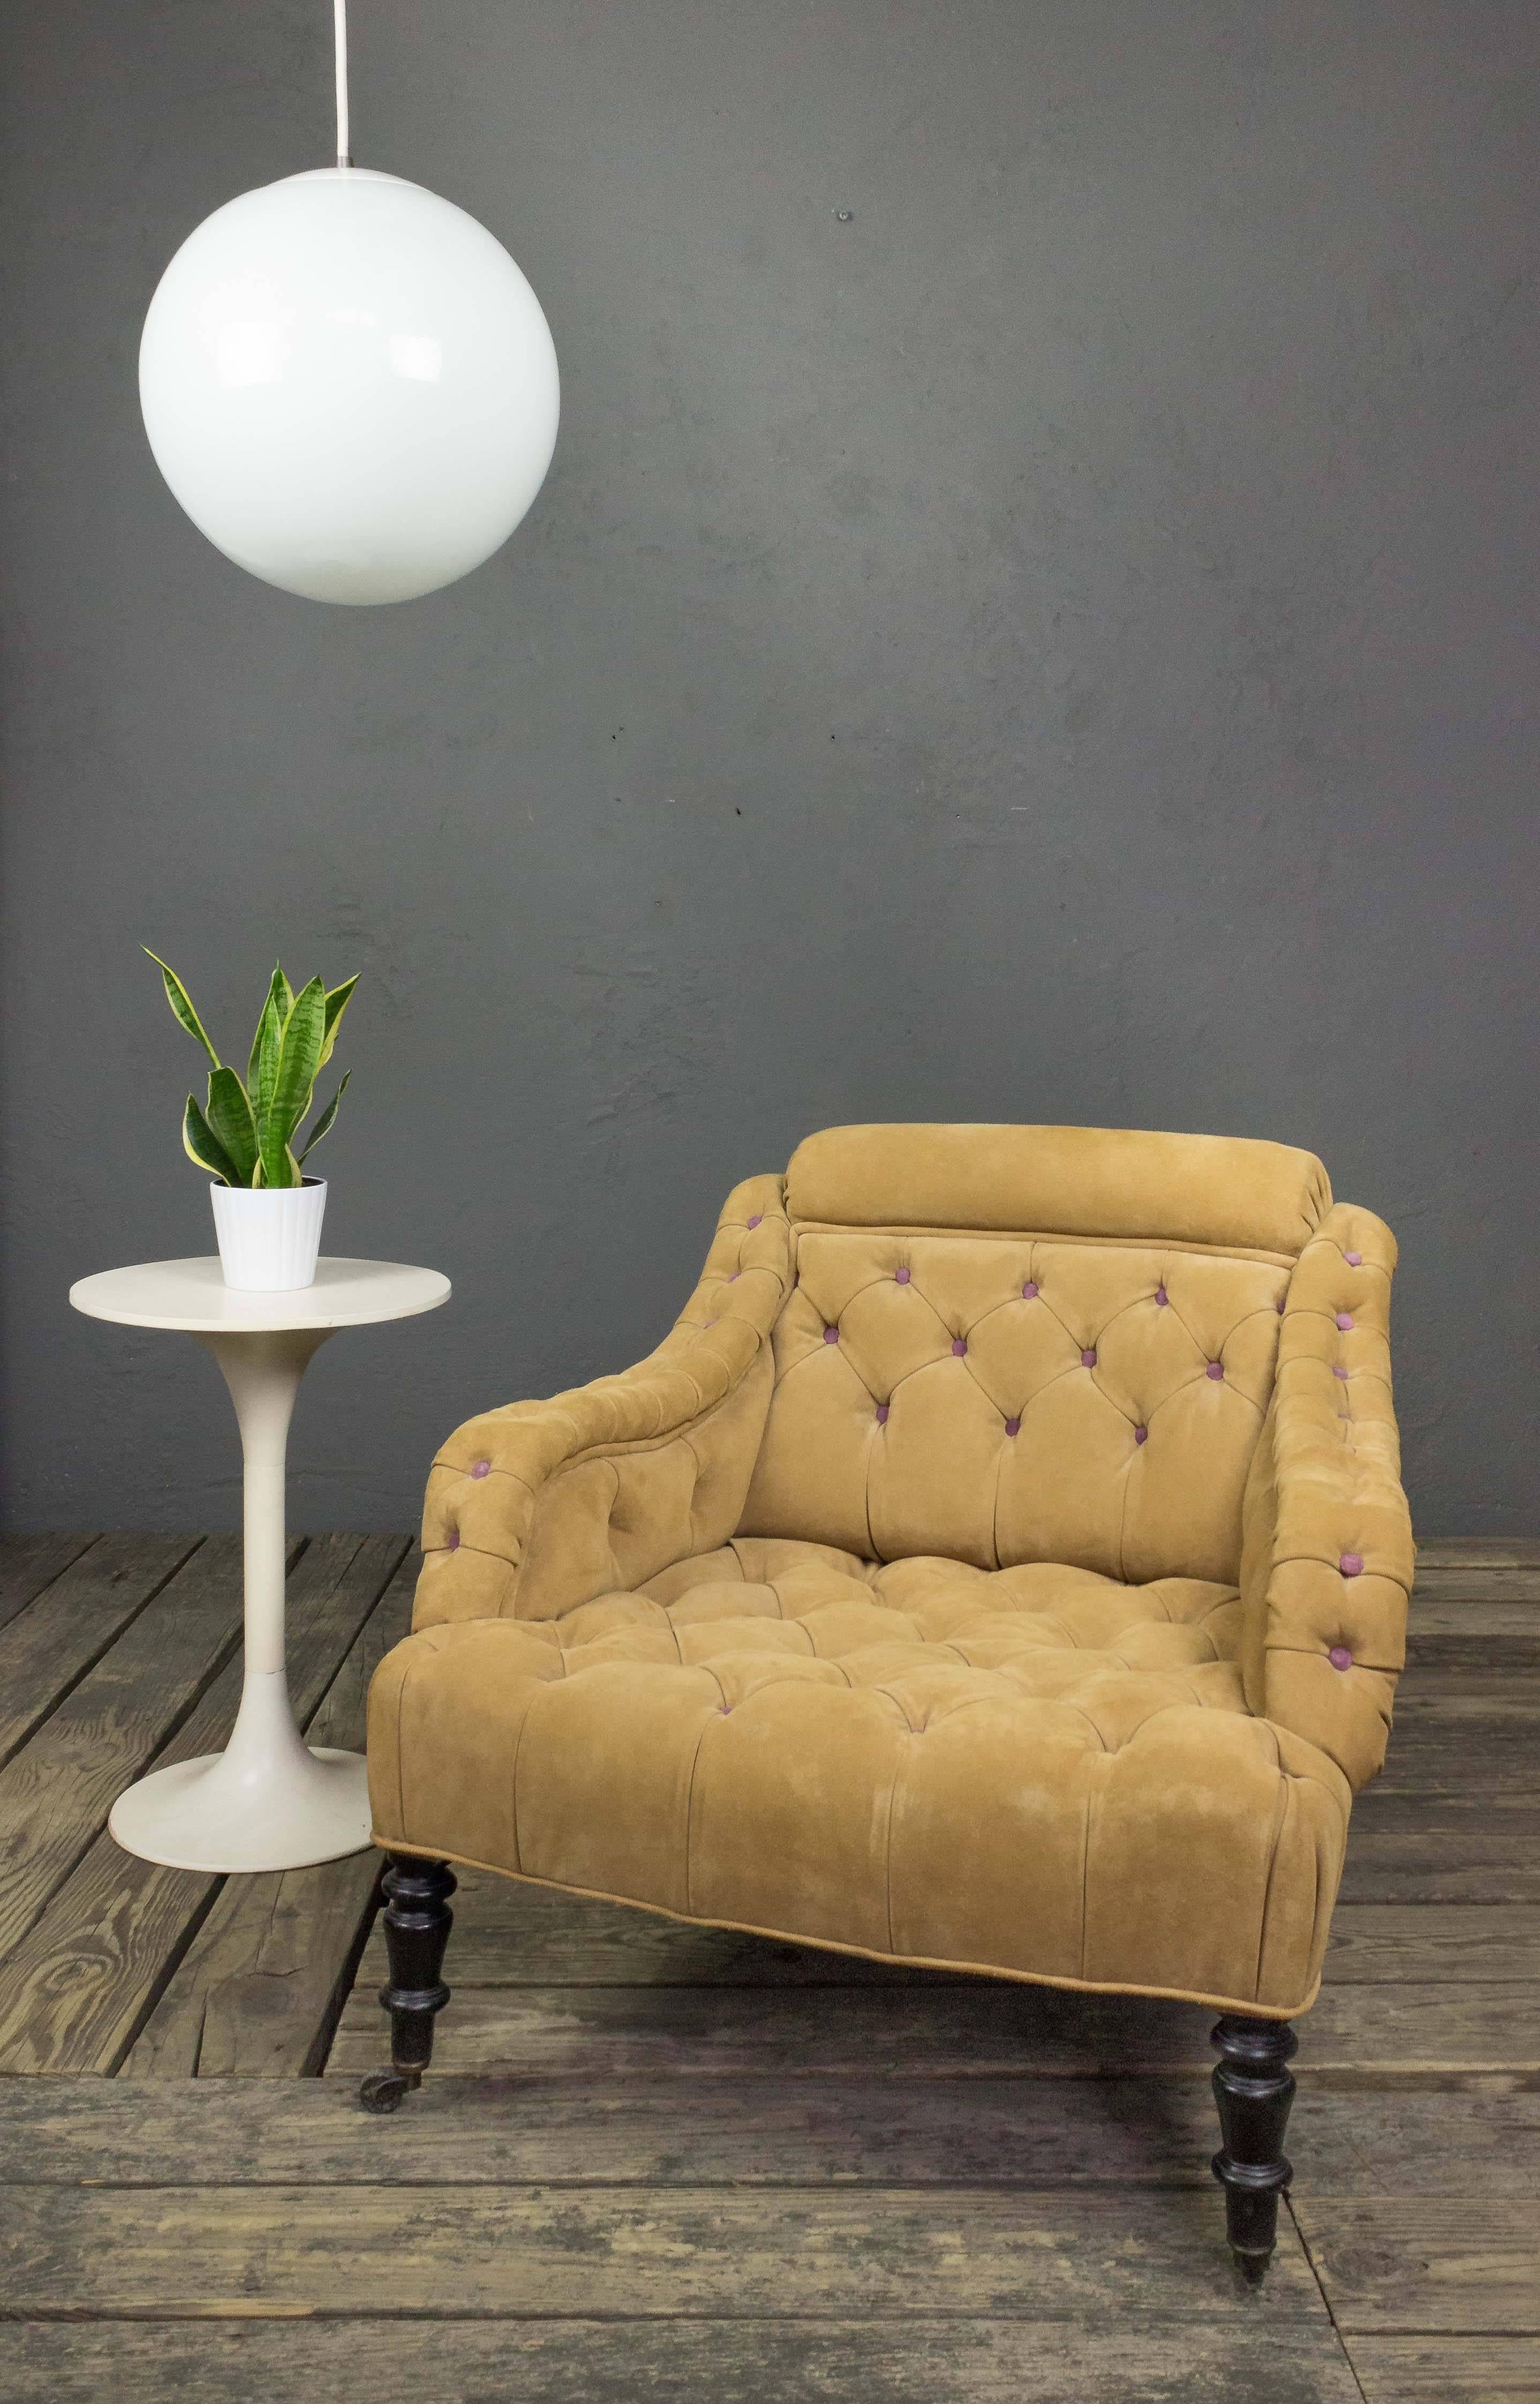 This French 19th century armchair is a one-of-a-kind piece. Its design is classic and timeless: tufted suede provides both visual appeal and comfort, while the rolled back ensures a secure seating posture. The chair is further accented with lovely